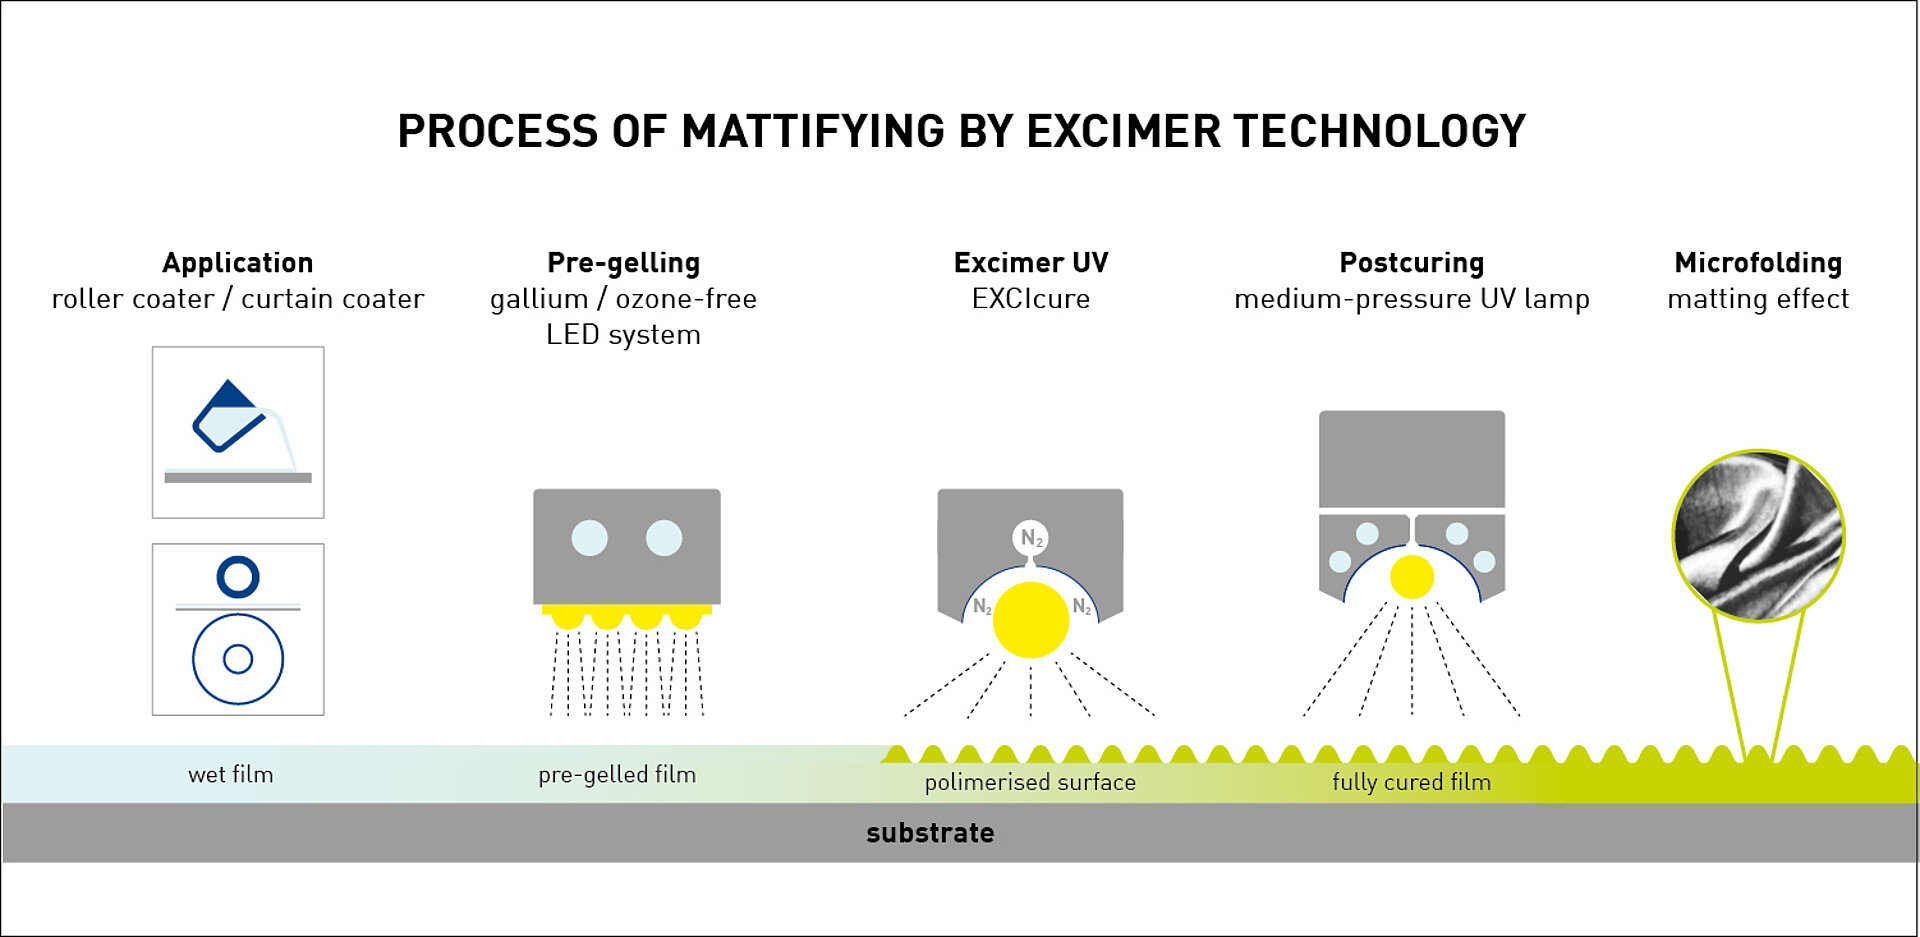 Matifying by excimer technology